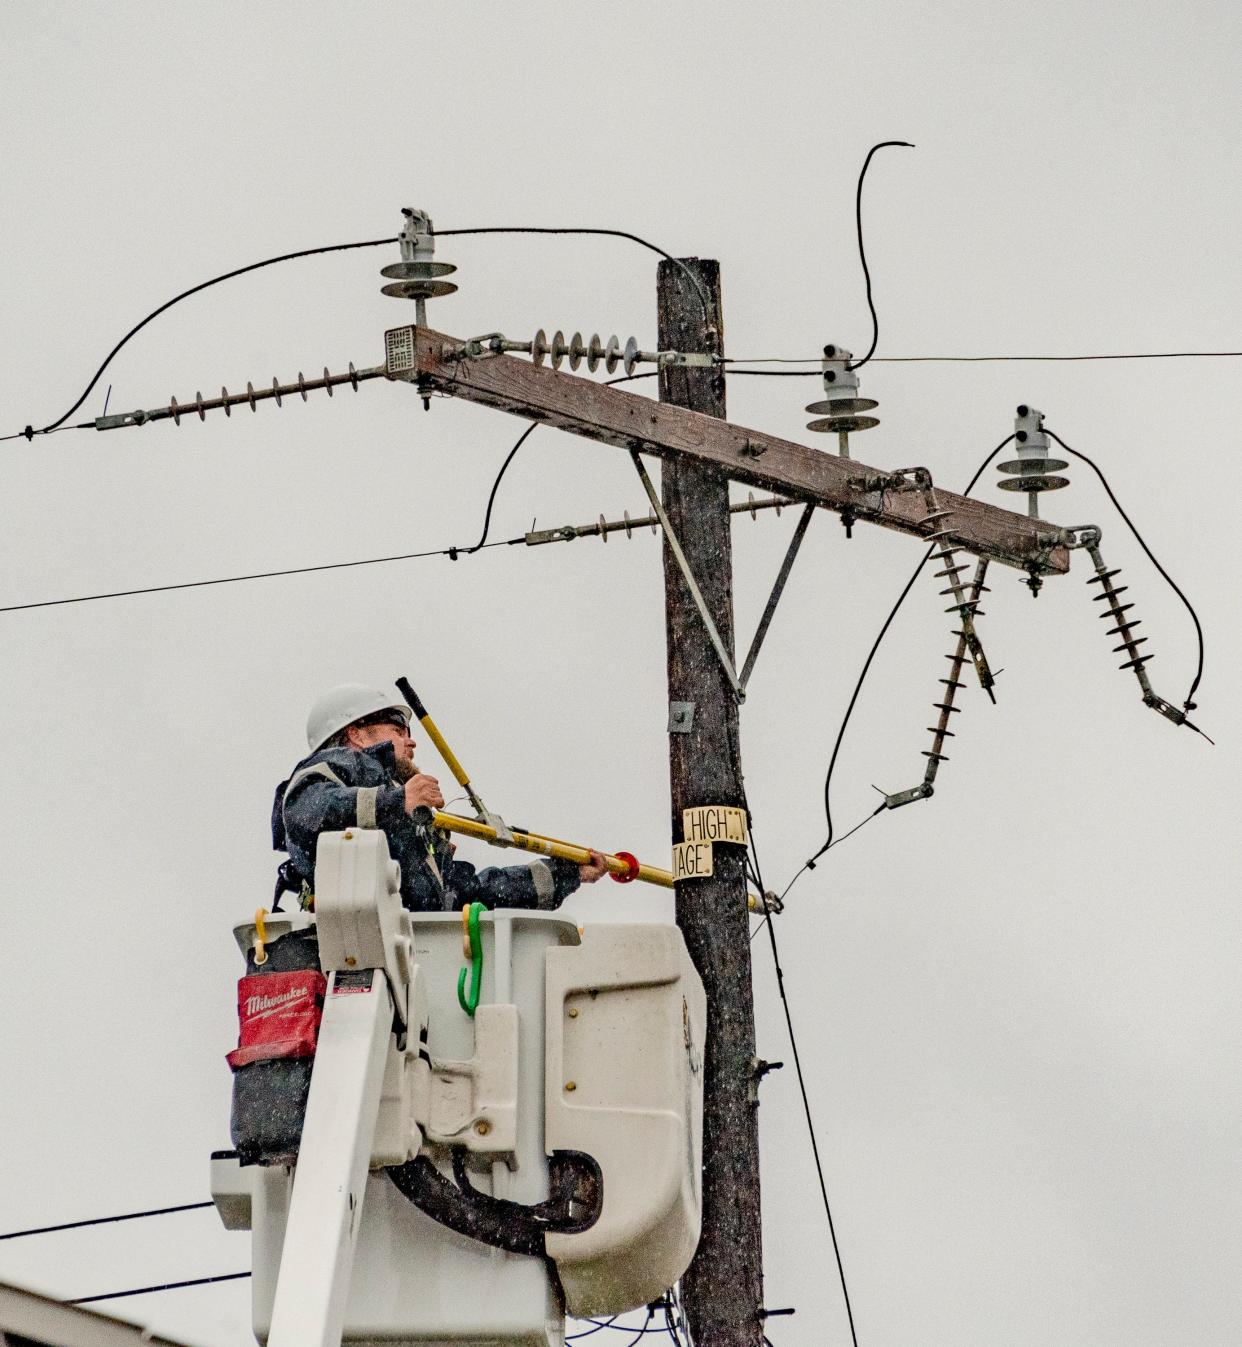 Southern California Edison will conduct a multi-hour, city-wide power maintenance outage beginning Friday. A second outage is scheduled the following week.